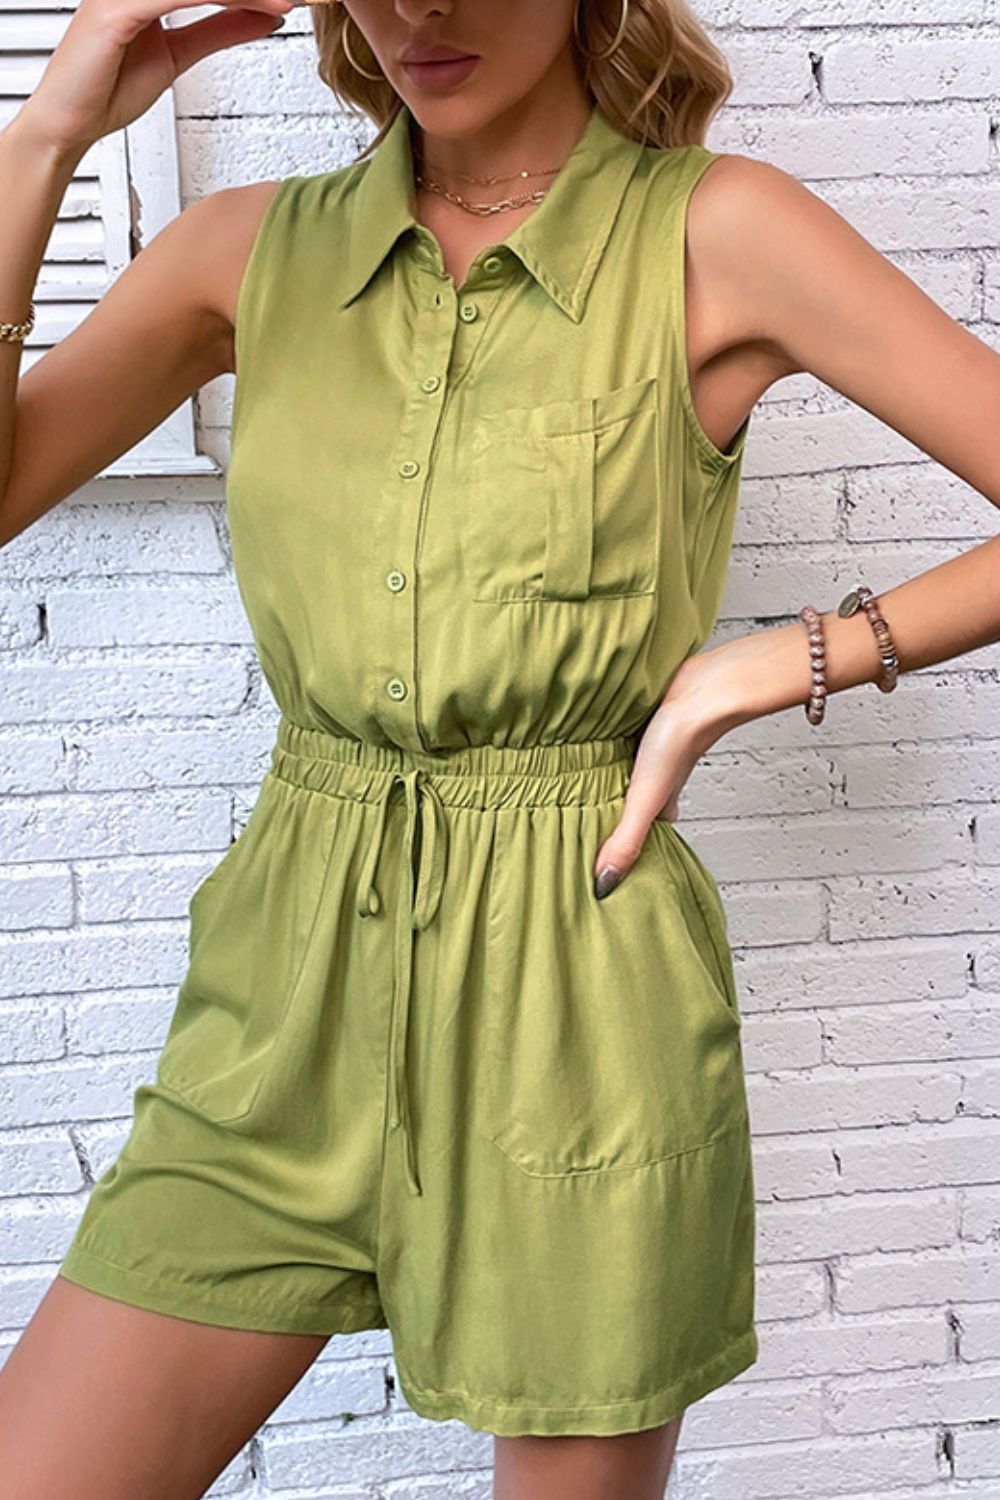 Collared Neck Sleeveless Romper with Pockets Playsuit  Sunset and Swim Chartreuse S 